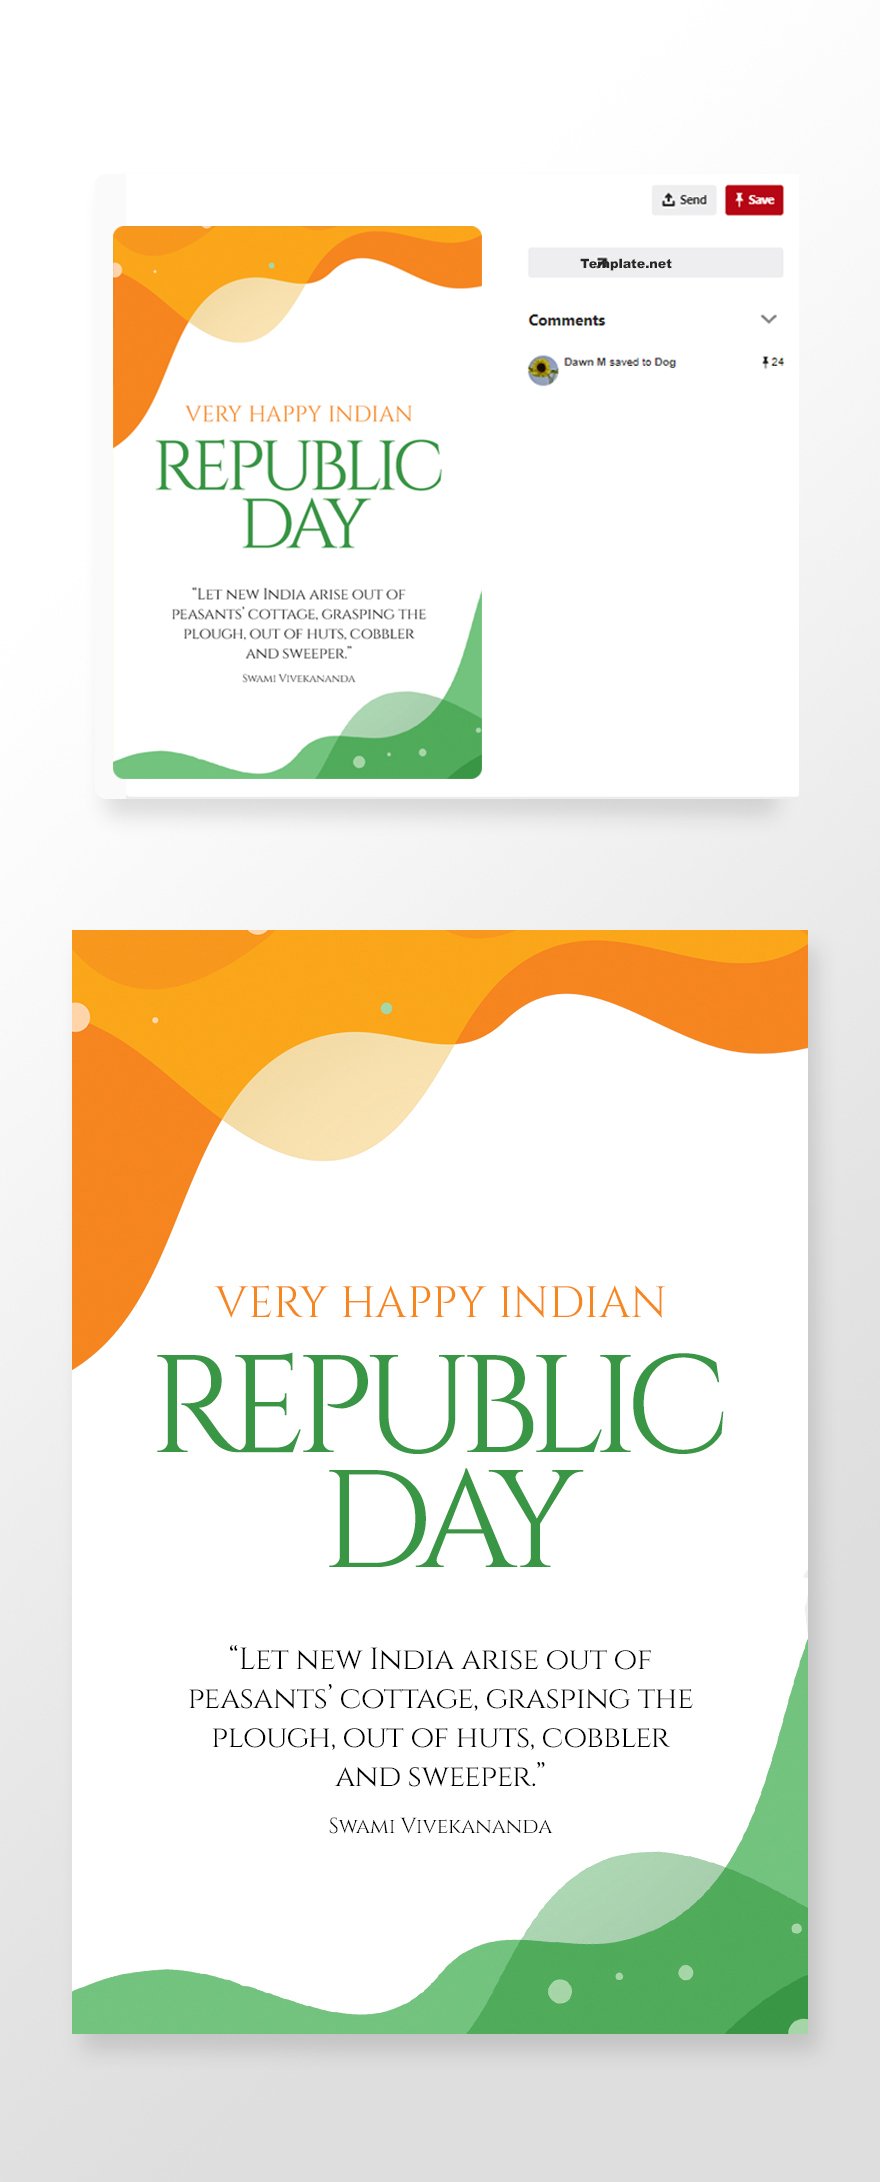 Free Republic Day Pinterest Pin Template in PSD